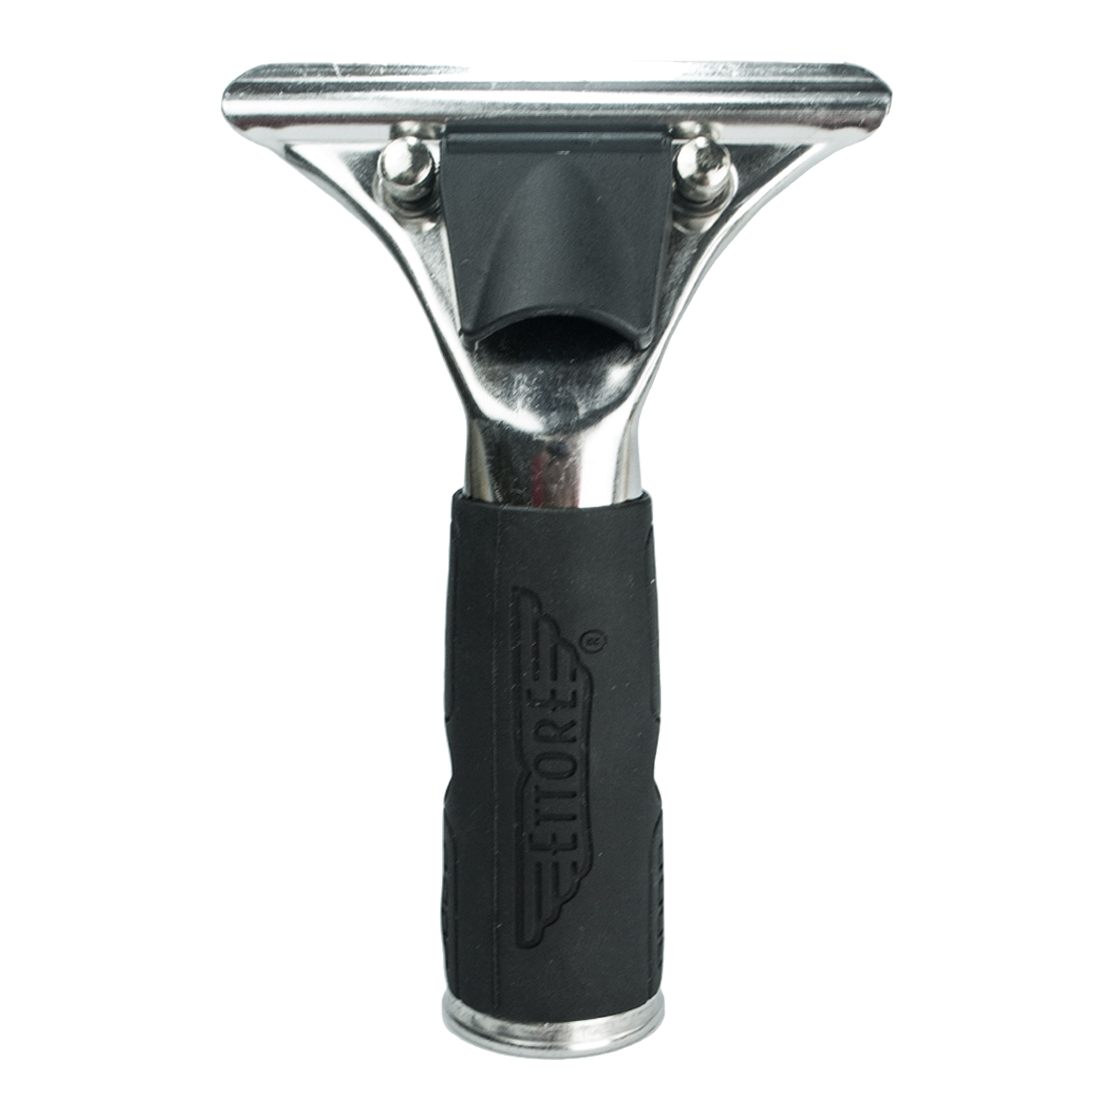 Ettore Quick Release Stainless Steel with Rubber Grip Squeegee Handle Upright Front View